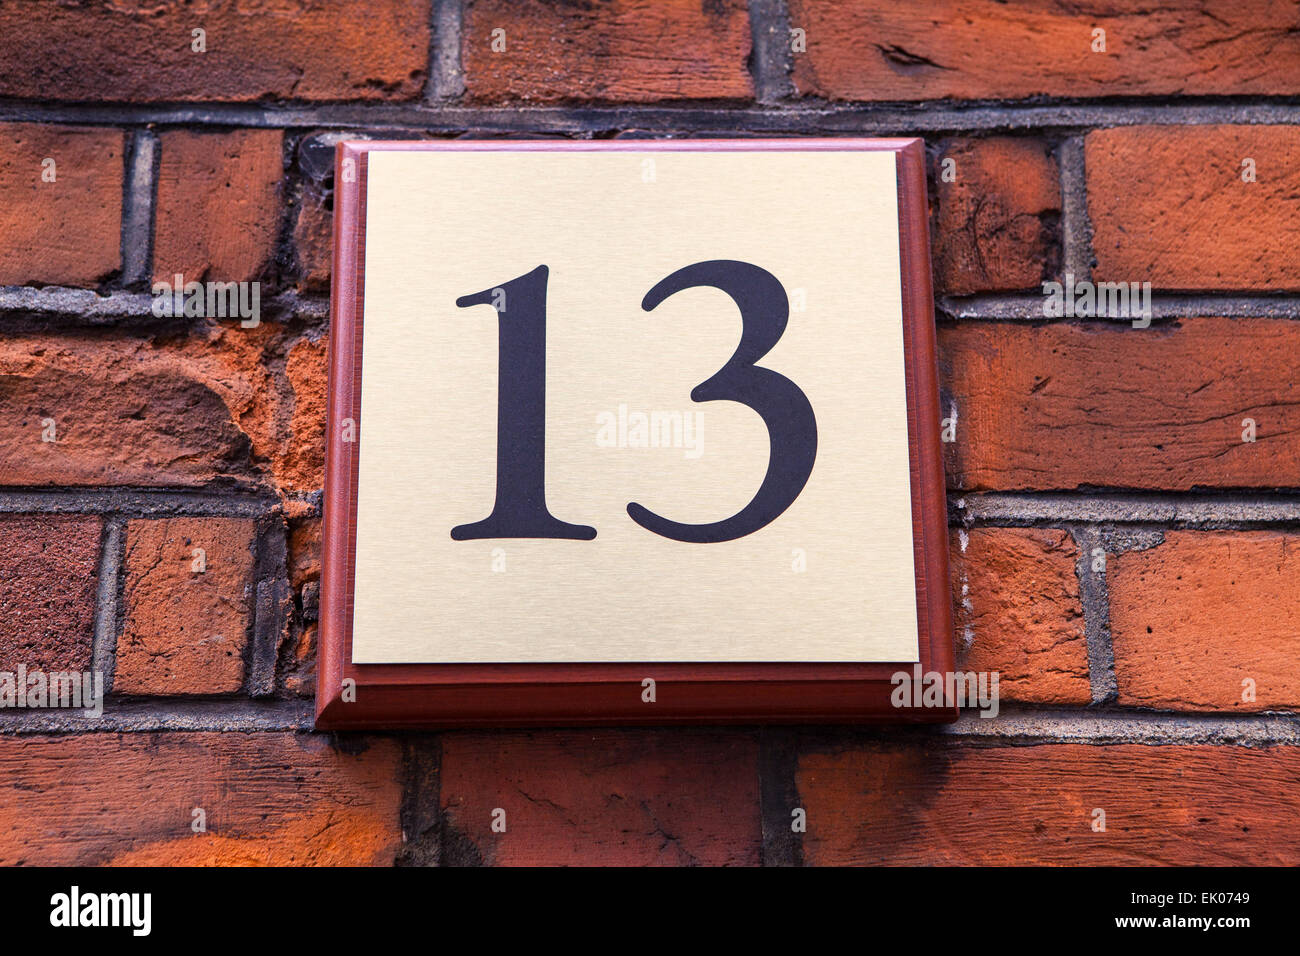 A plaque on a wall displaying the Number 13. Stock Photo